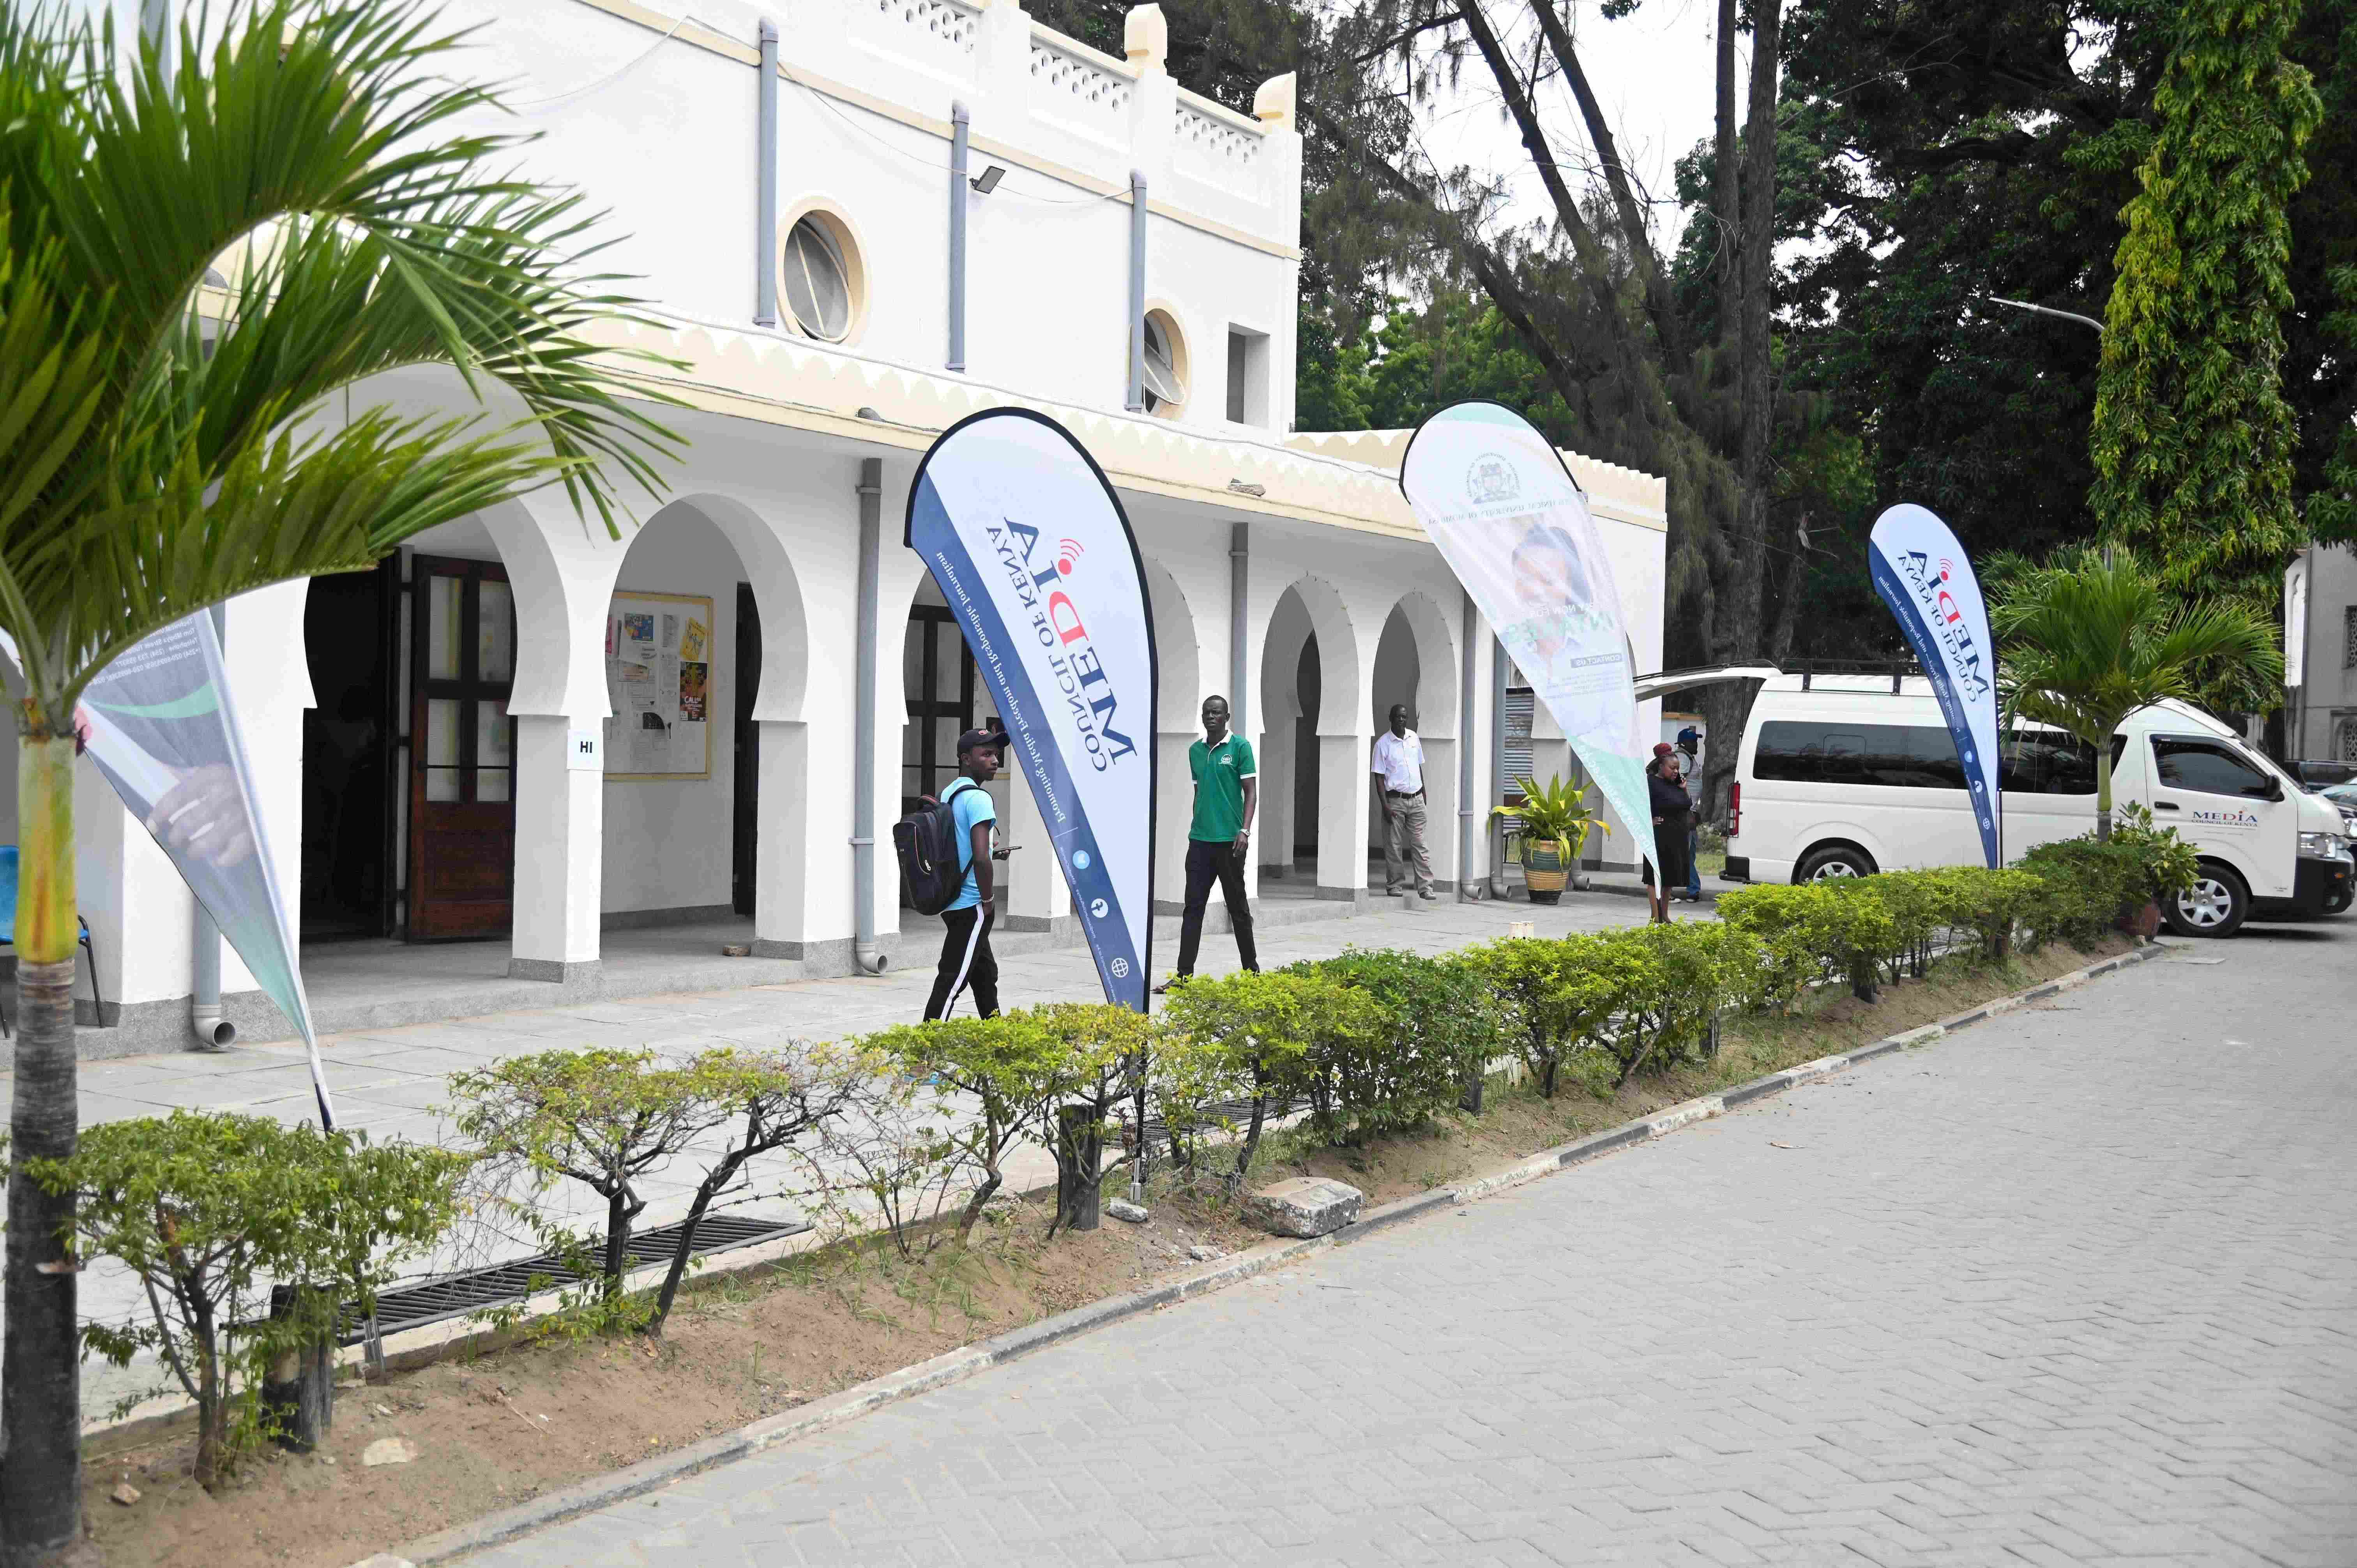 All set for 2023 World Radio Day Celebrations as MCK spearheads preparations in Mombasa